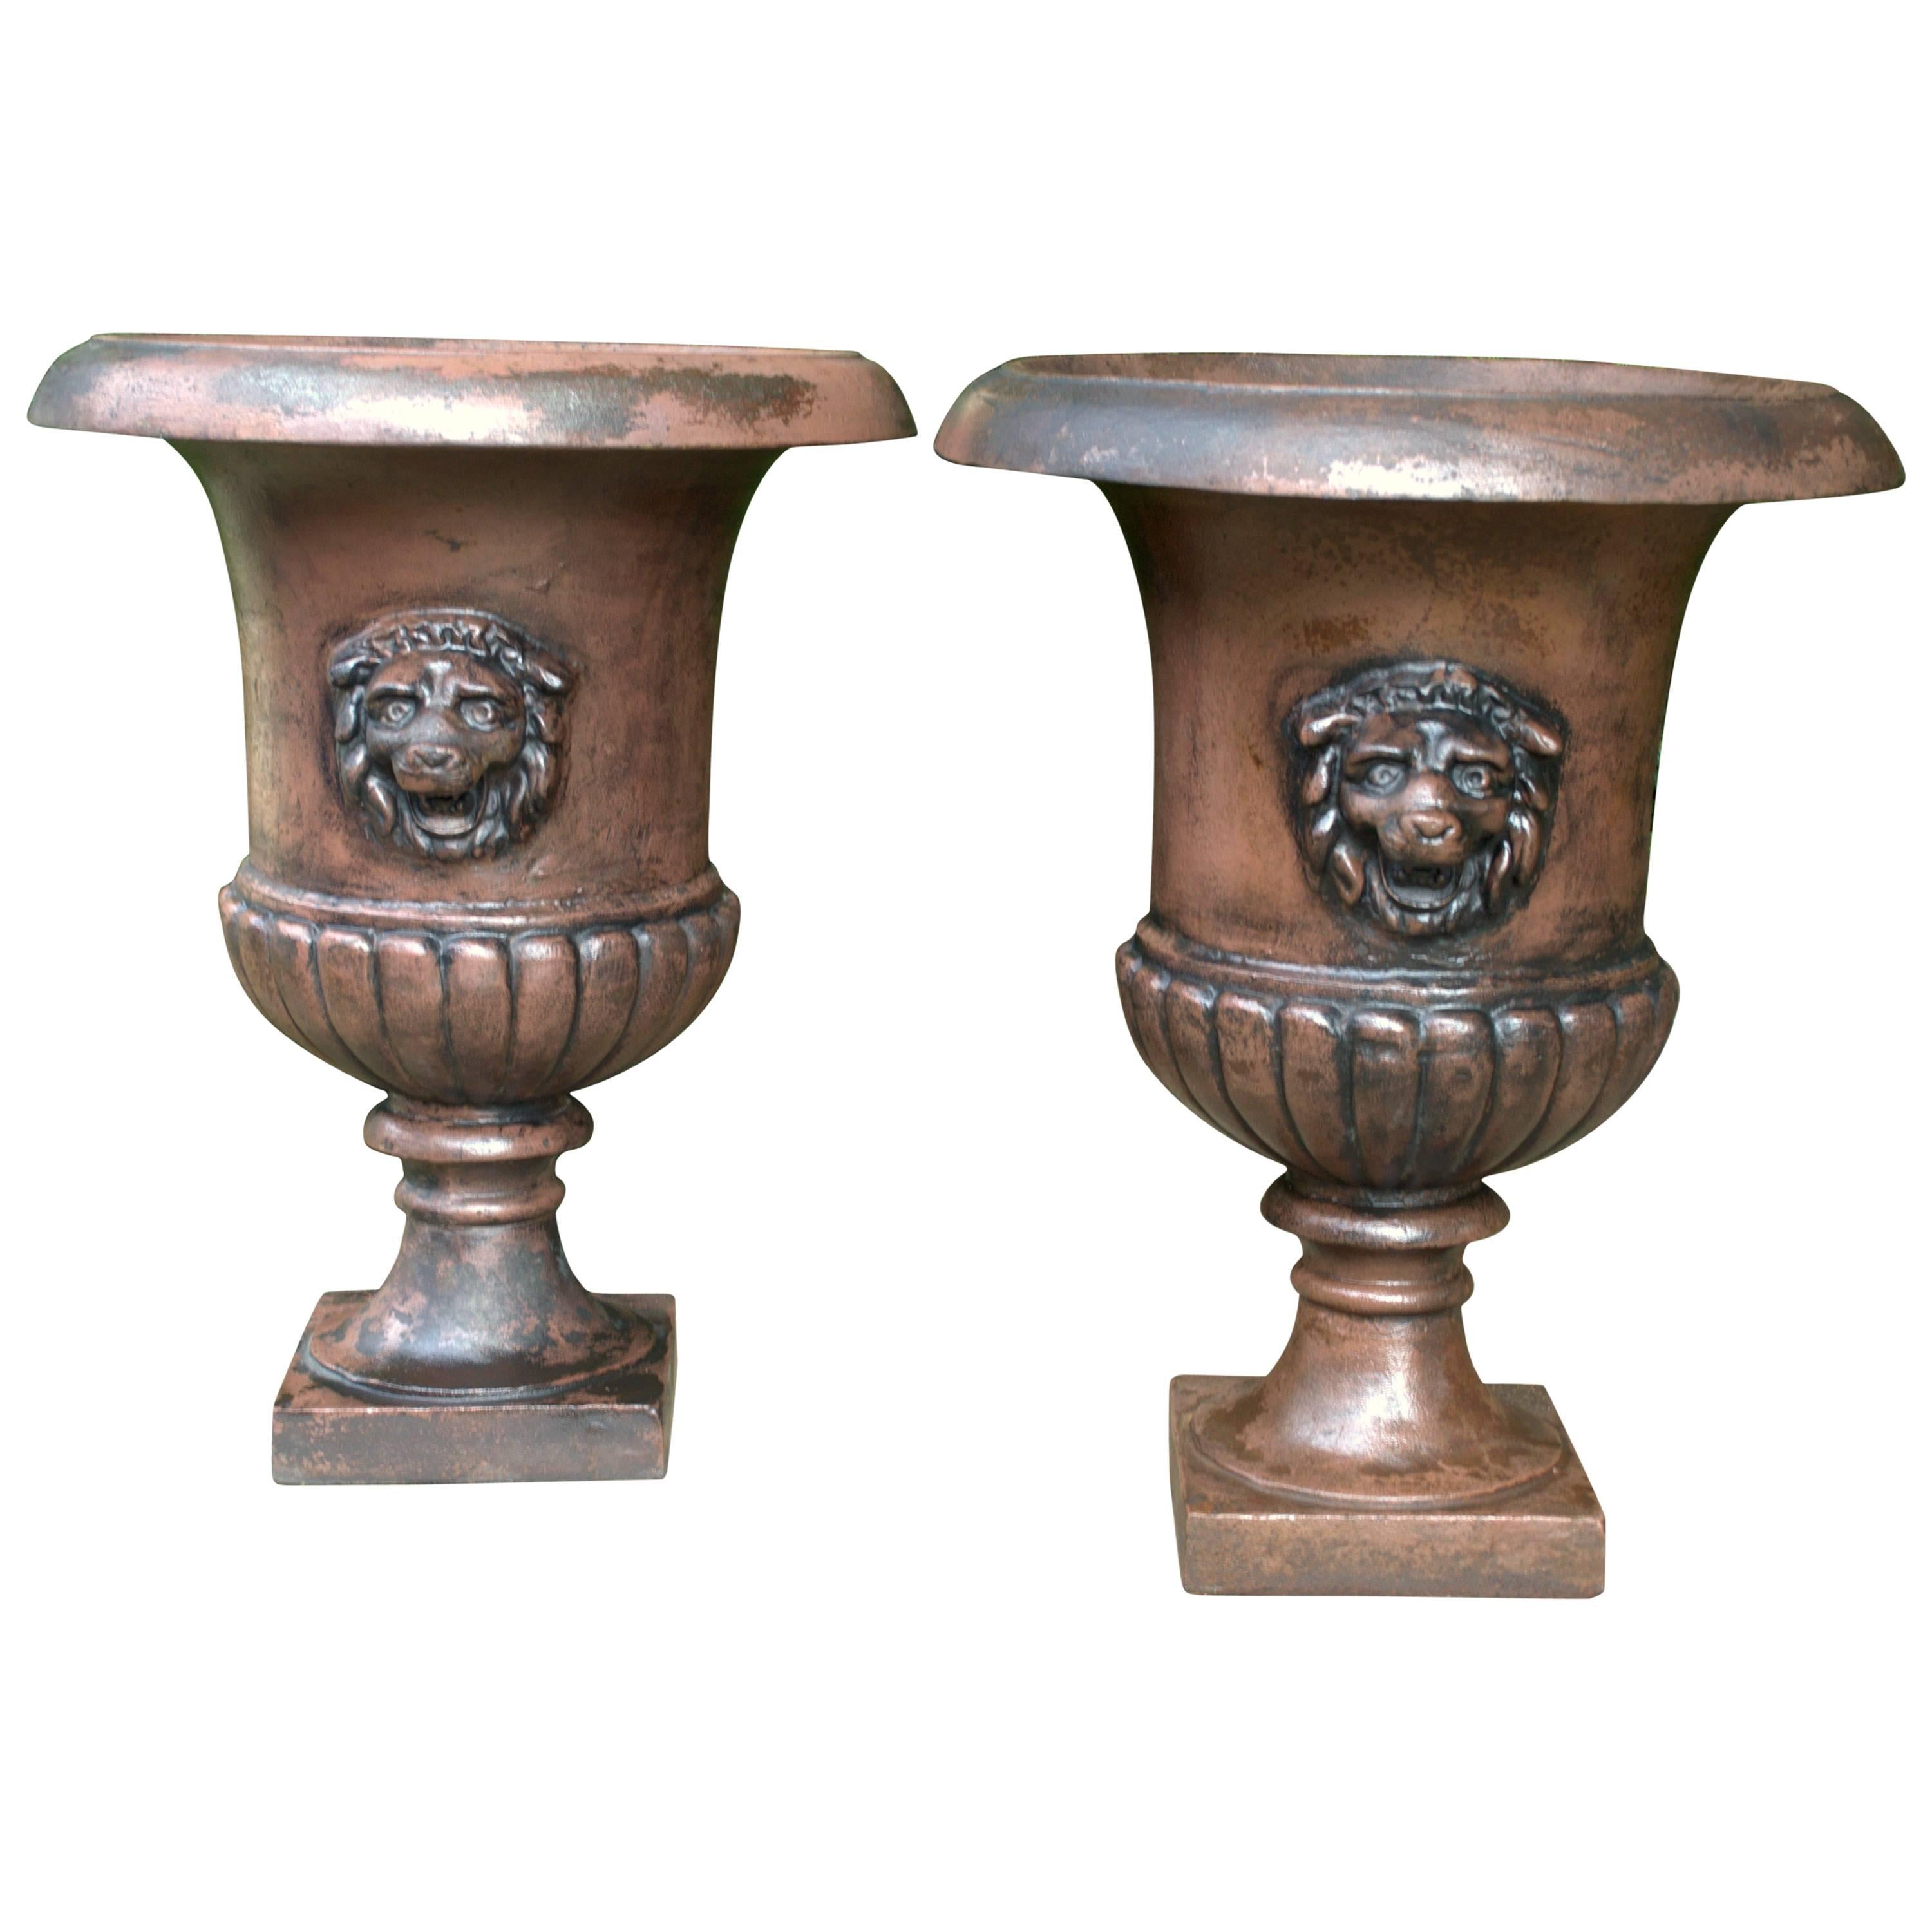 1810s St.Pauls Estate Hedge Maze Entryway Urns with Lions Heads For Sale